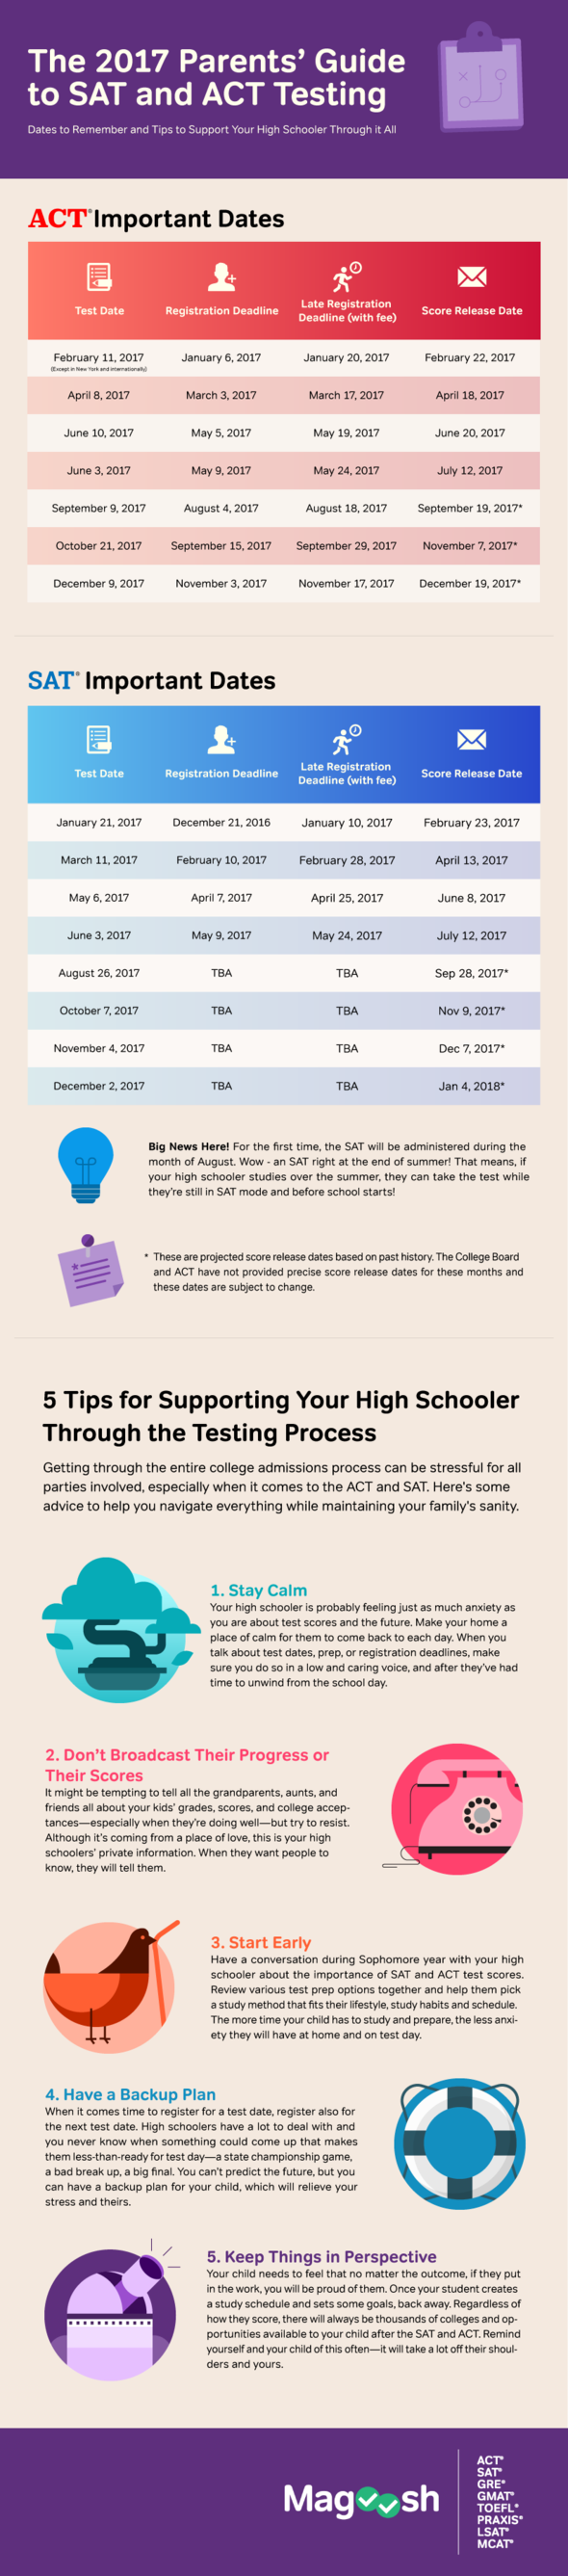 5 Great Ways to Get Your High Schooler Ready for the SAT/ACT